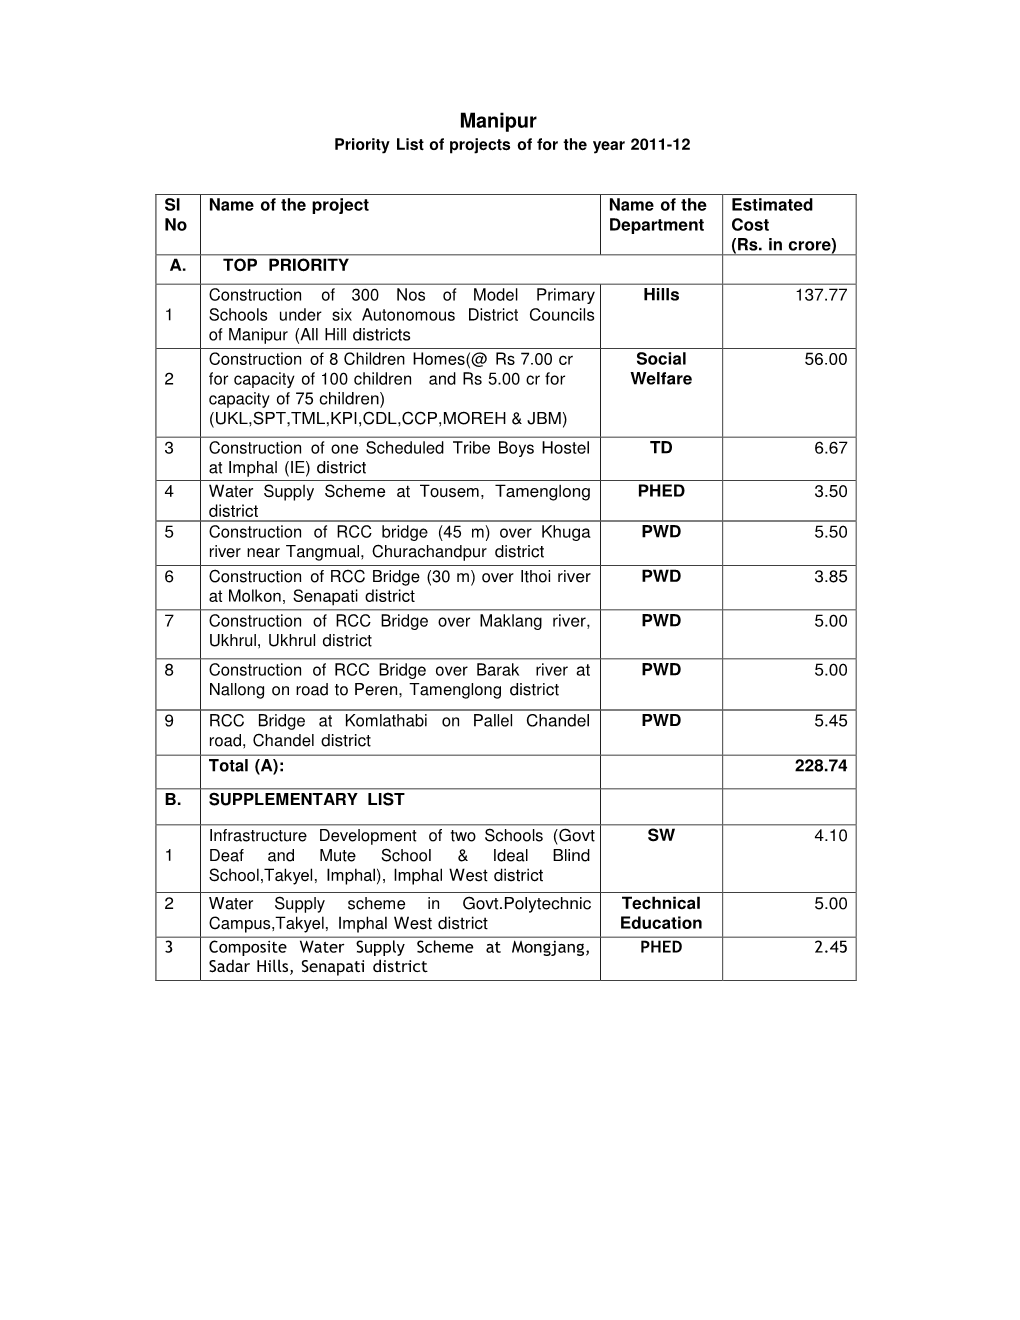 Manipur Priority List of Projects of for the Year 2011-12